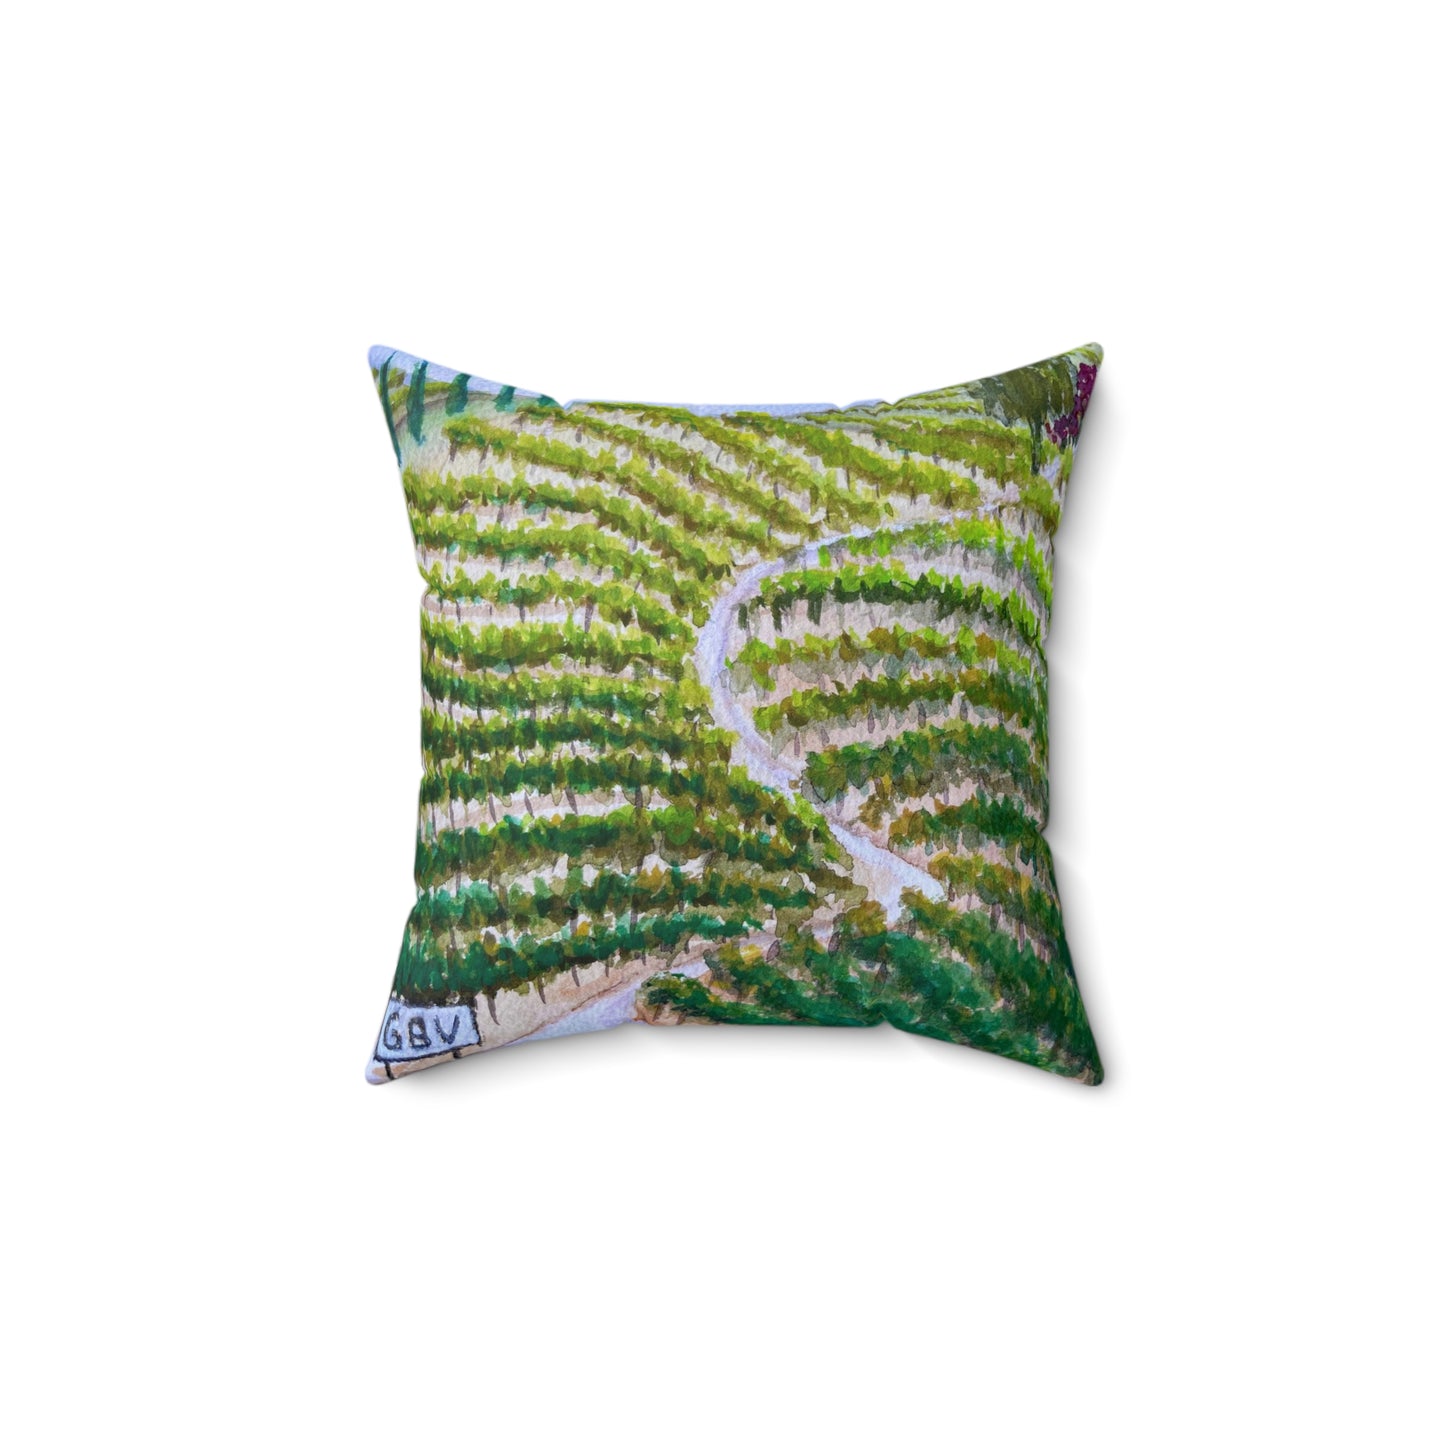 Road to the Villa GBV  Indoor Spun Polyester Square Pillow